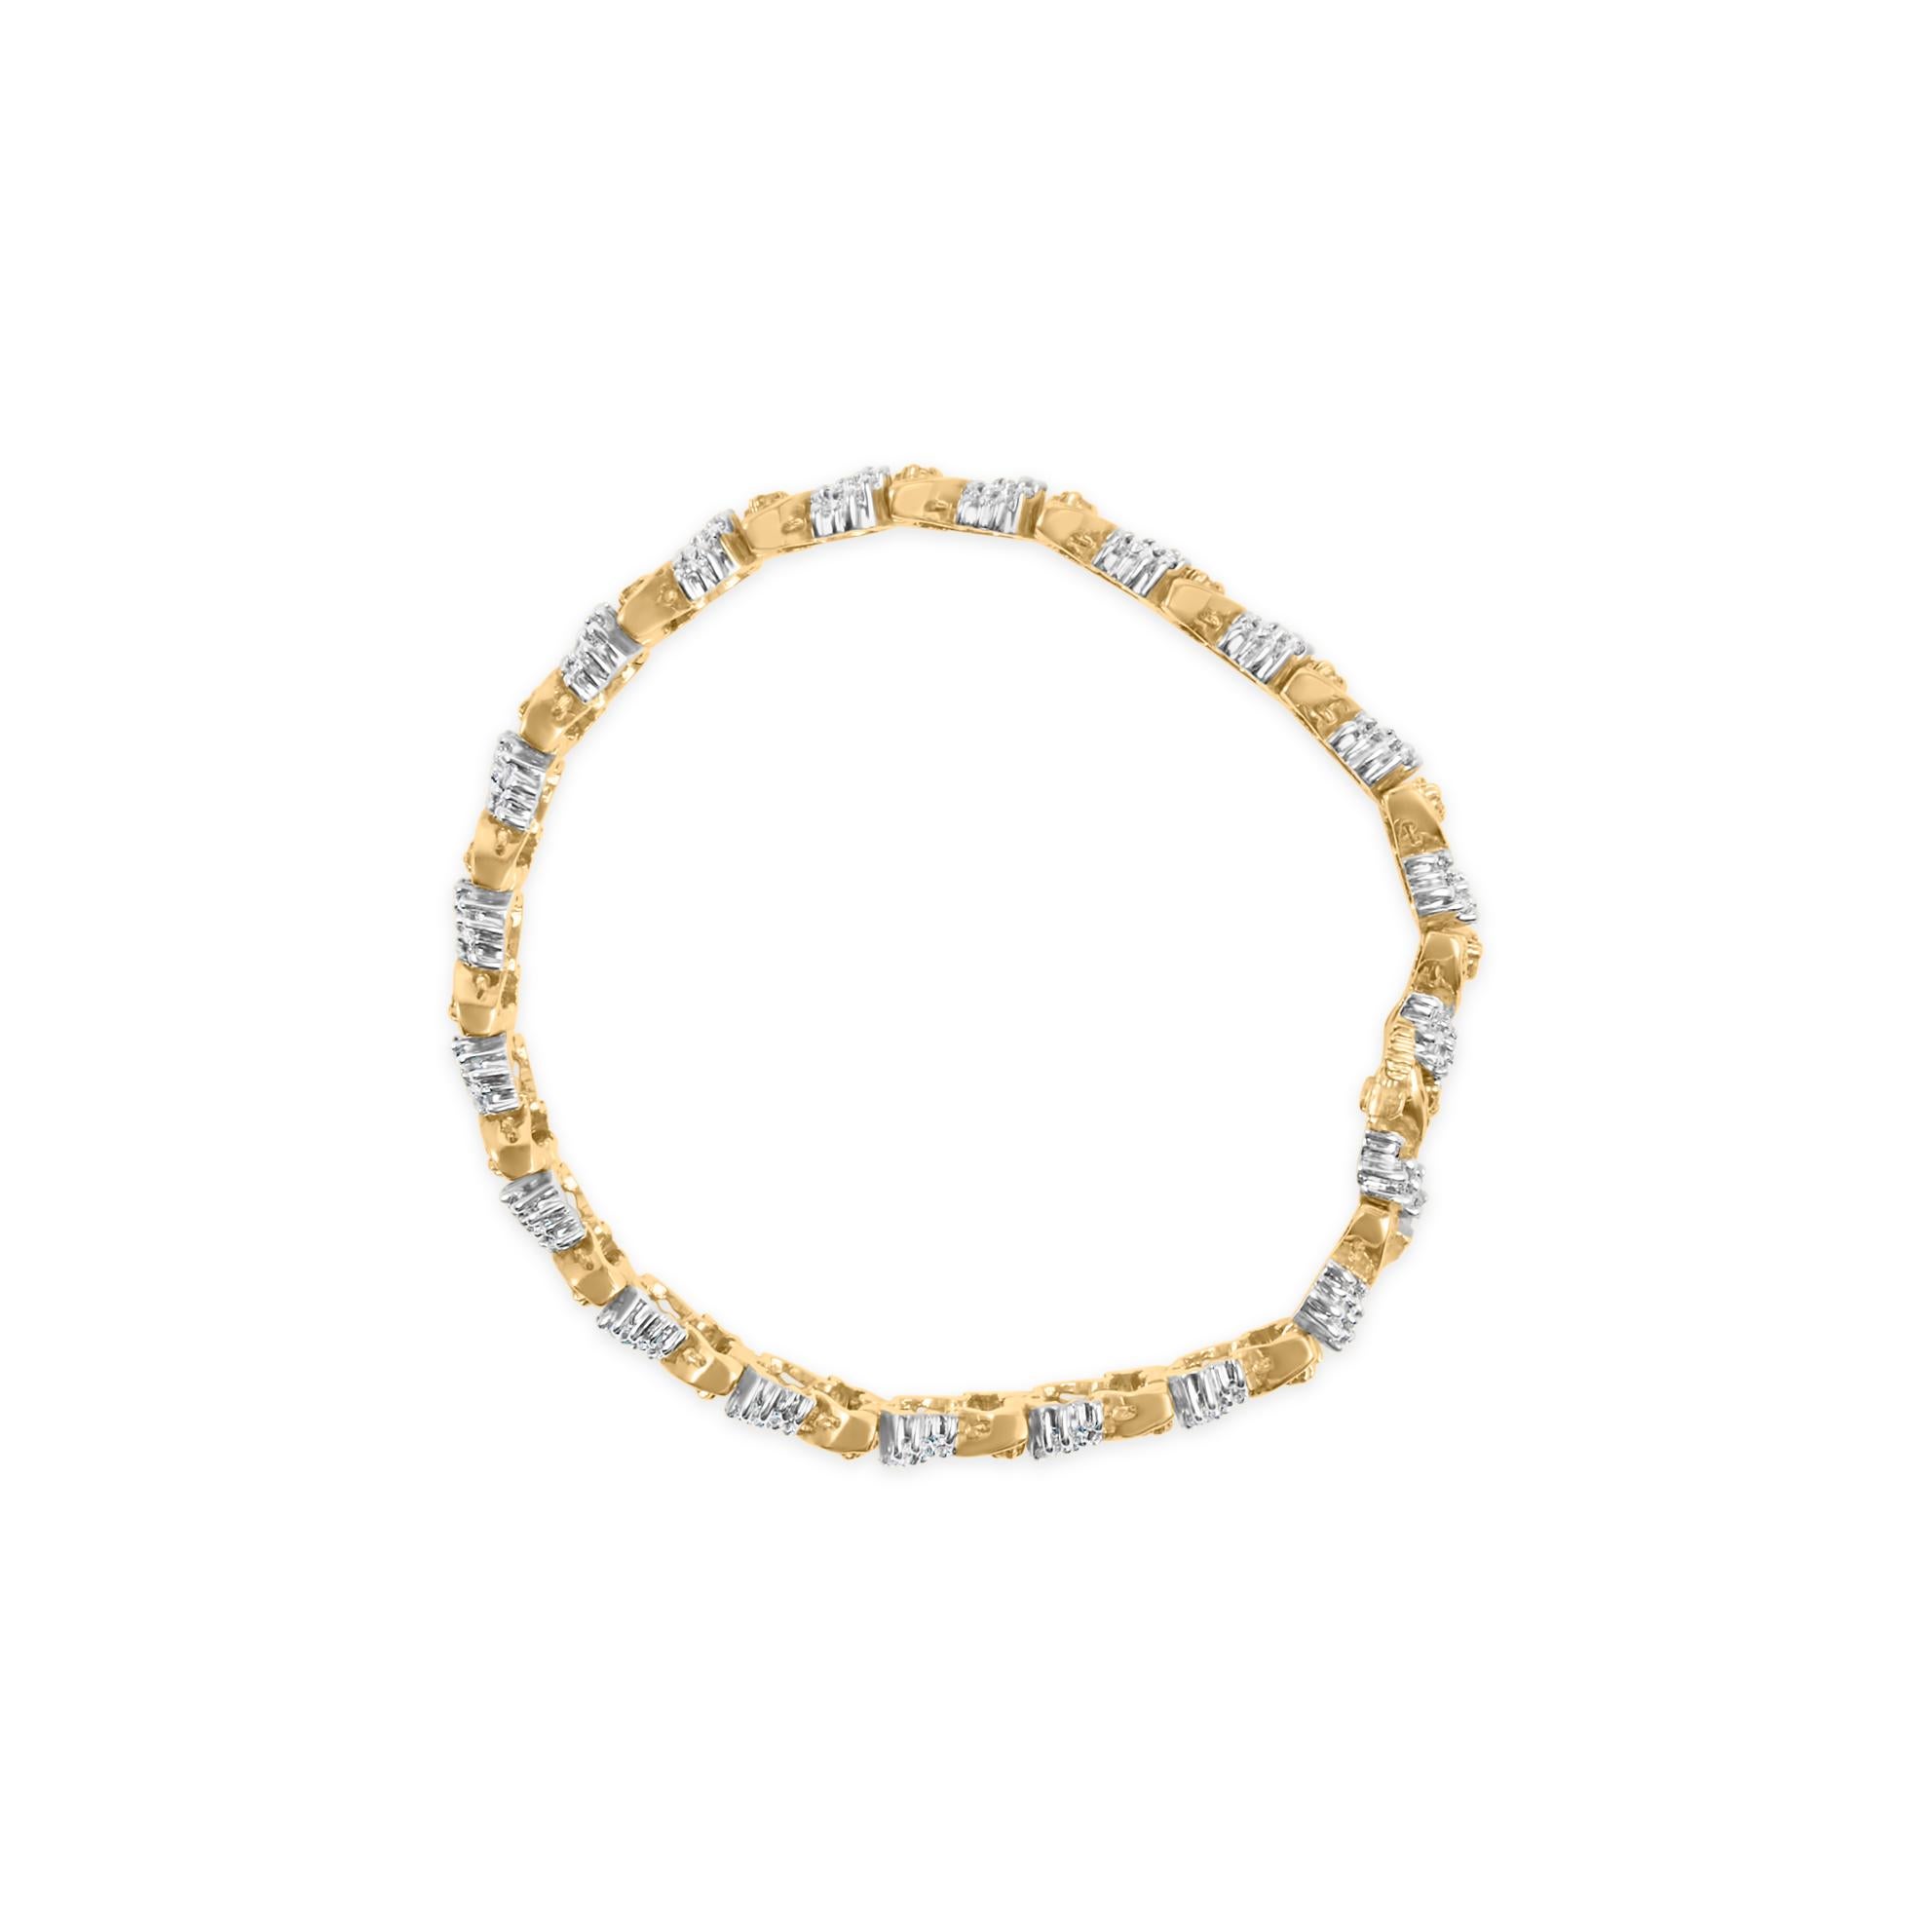 Contemporary 14K Yellow Gold 4.0 Carat Diamond Woven Composite Cluster and S-Link Bracelet For Sale